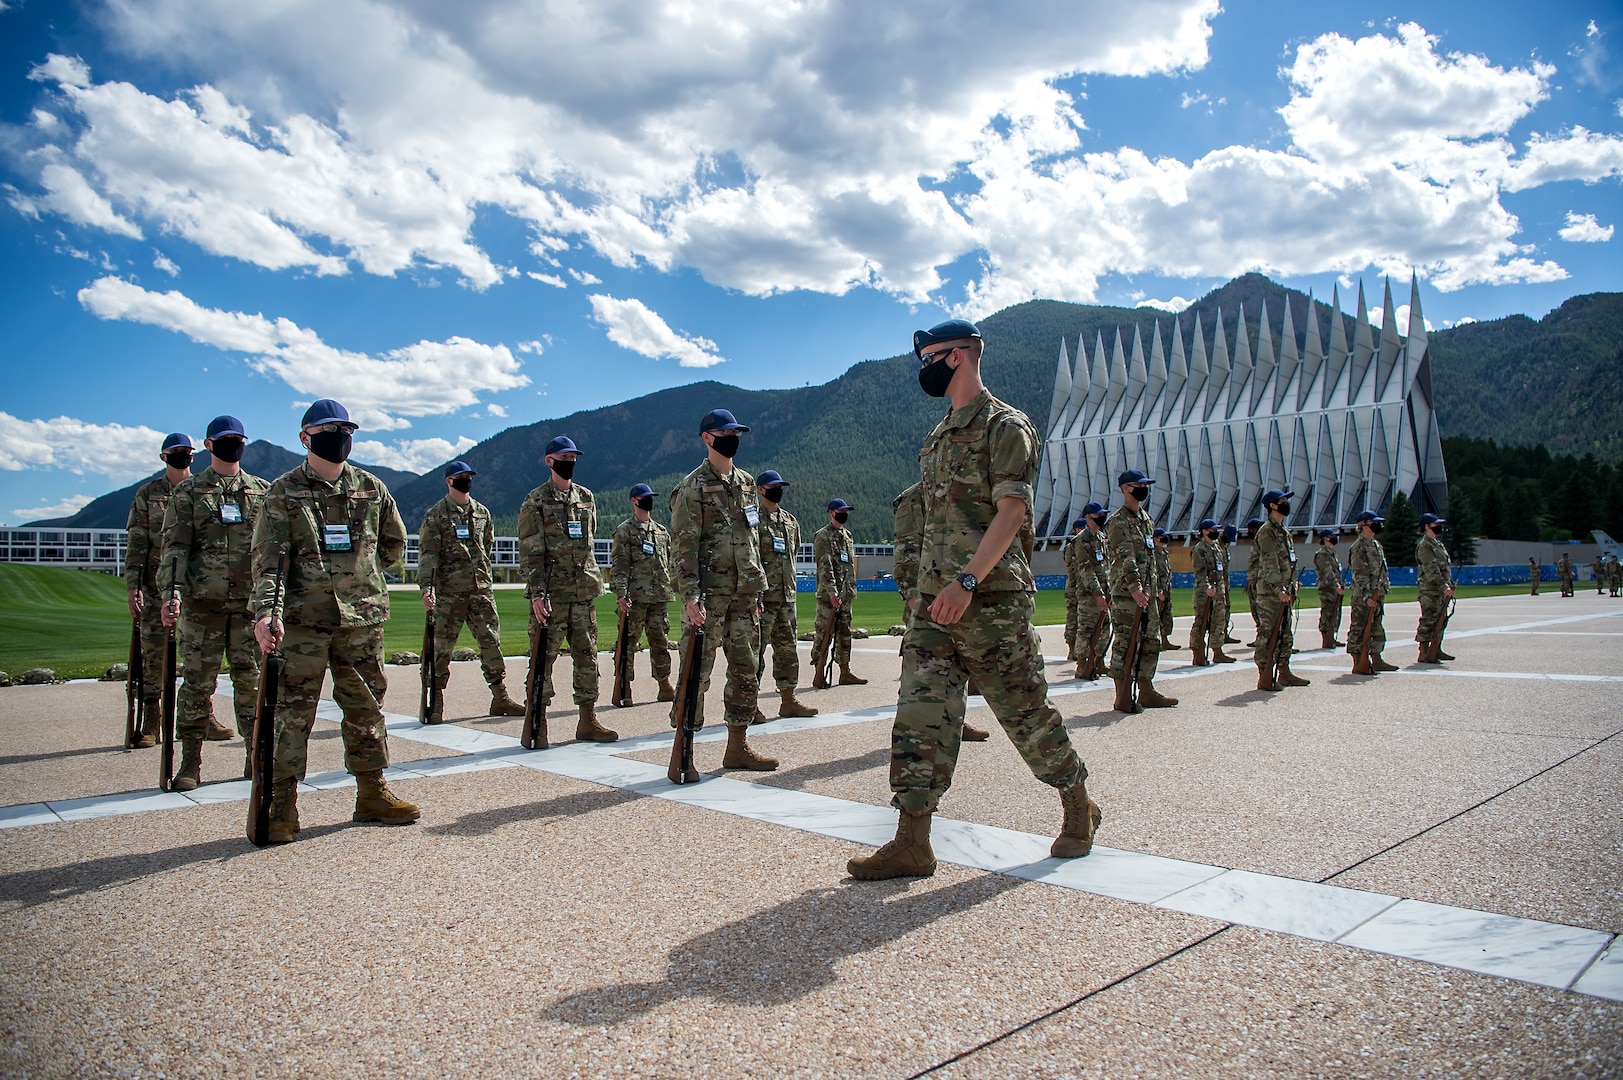 Academy basic cadets participate in the first phase of basic cadet training with marching drills July 8, 2020 on the Terrazzo at the U.S. Air Force Academy.